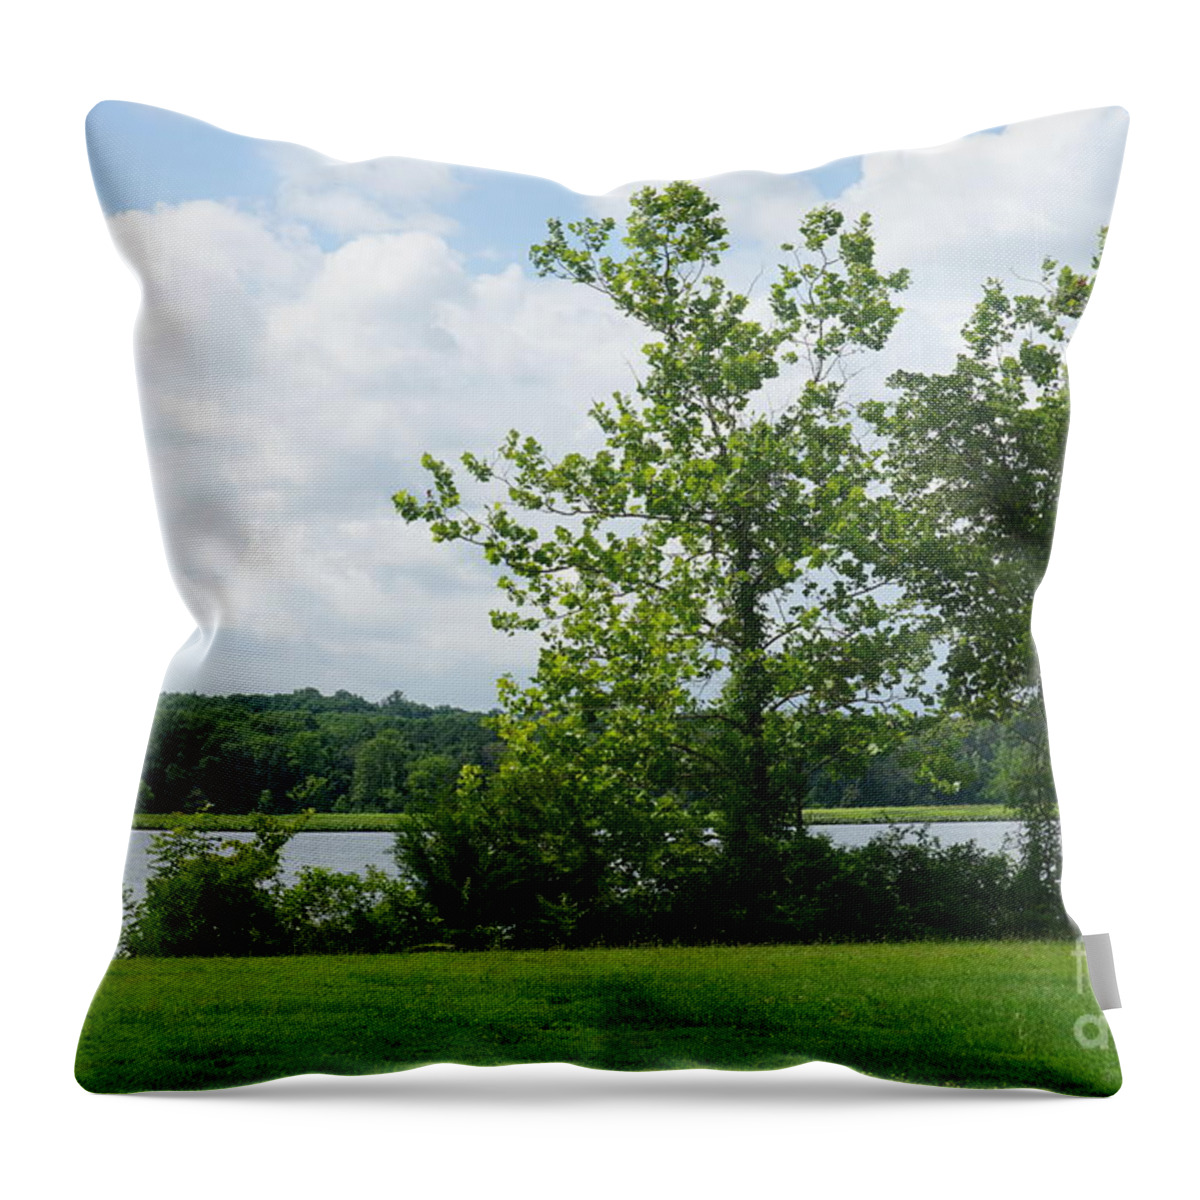  Lake Throw Pillow featuring the photograph Landscape Photo II by Jimmy Clark